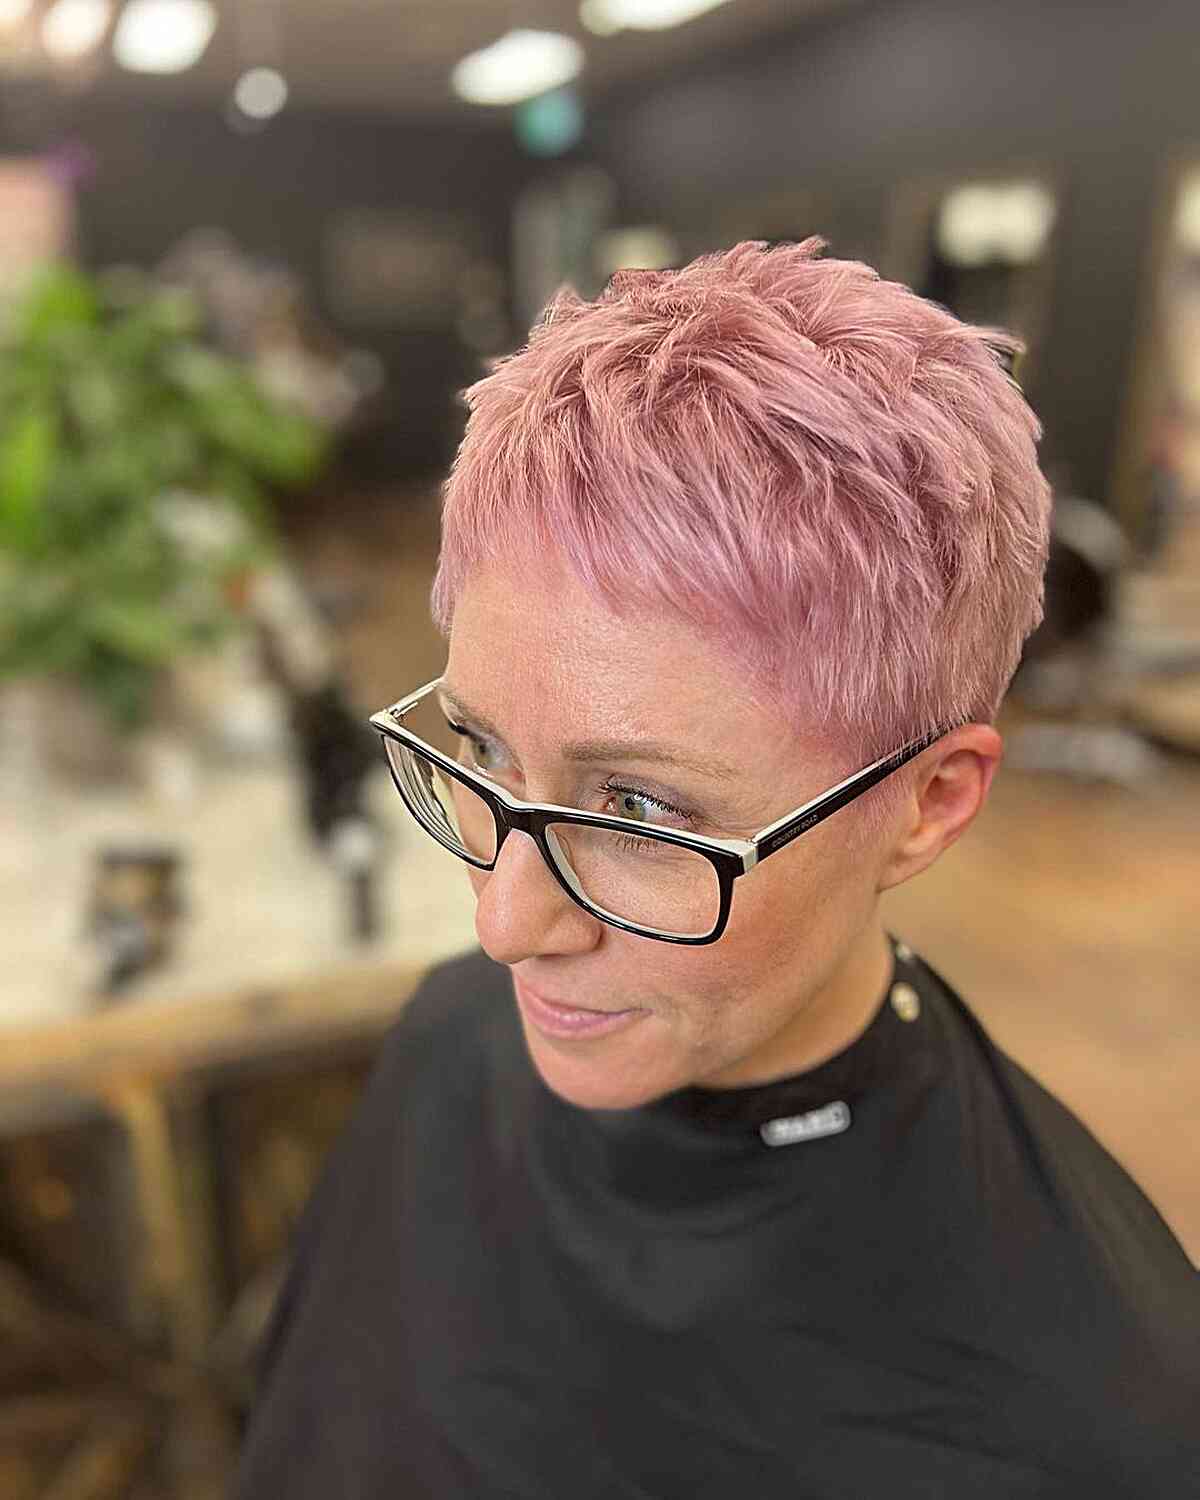 Pink Choppy Pixie Hair for Older Ladies Over 50 with Eyeglasses